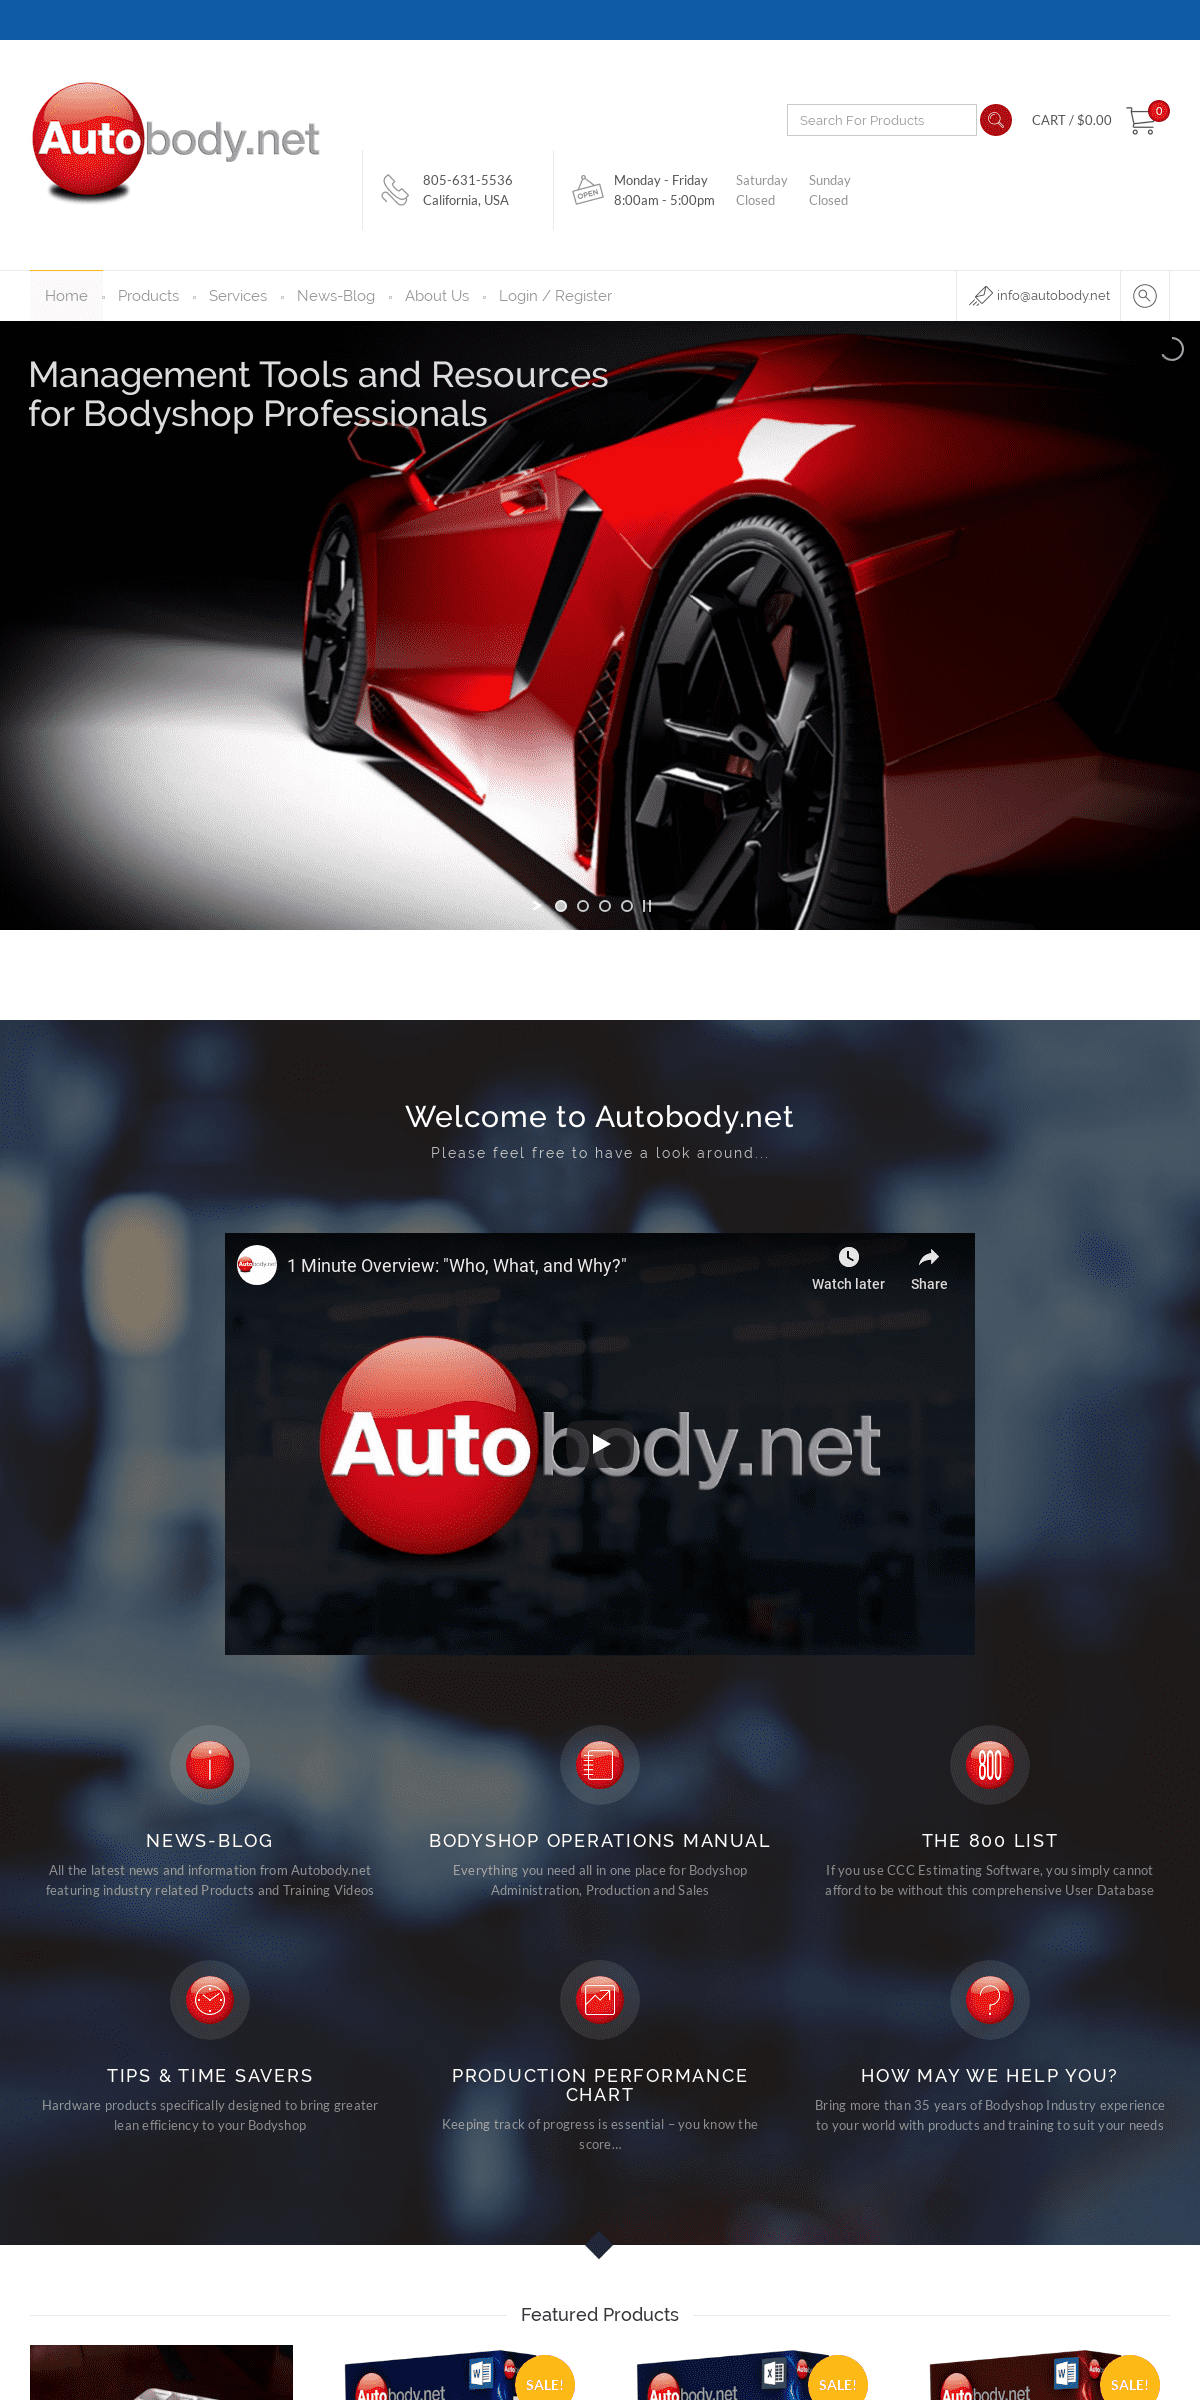 A complete backup of autobody.net